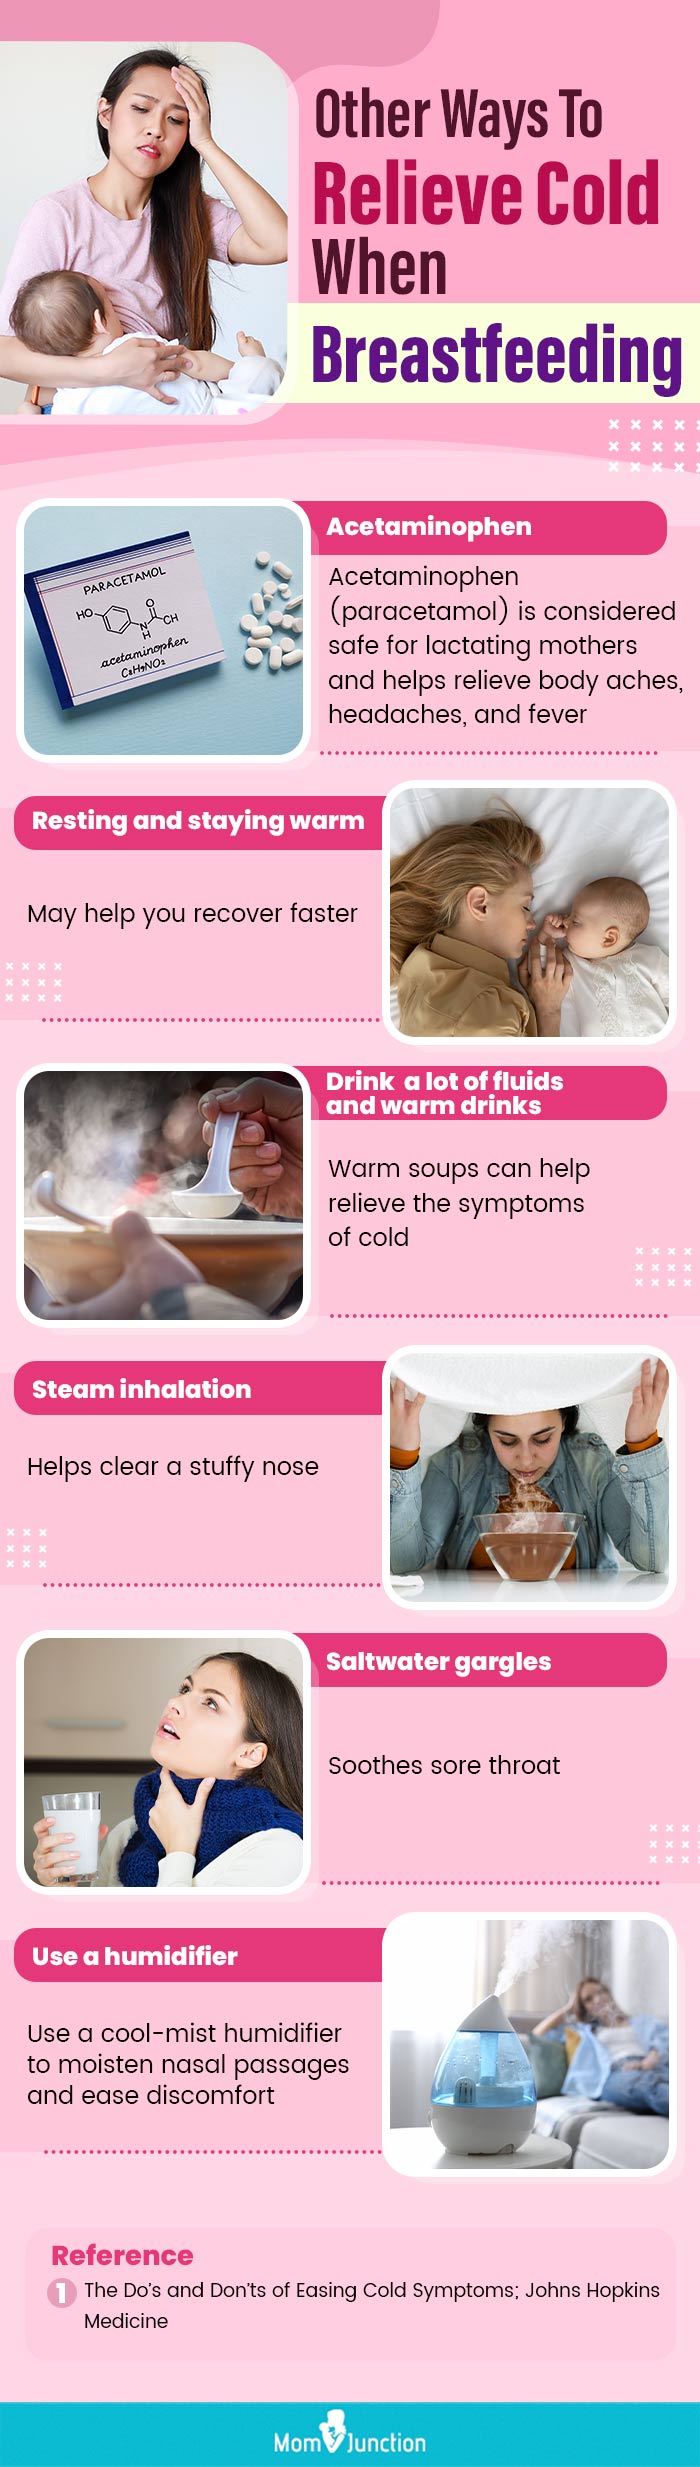 other ways to relieve cold when breastfeeding (infographic)